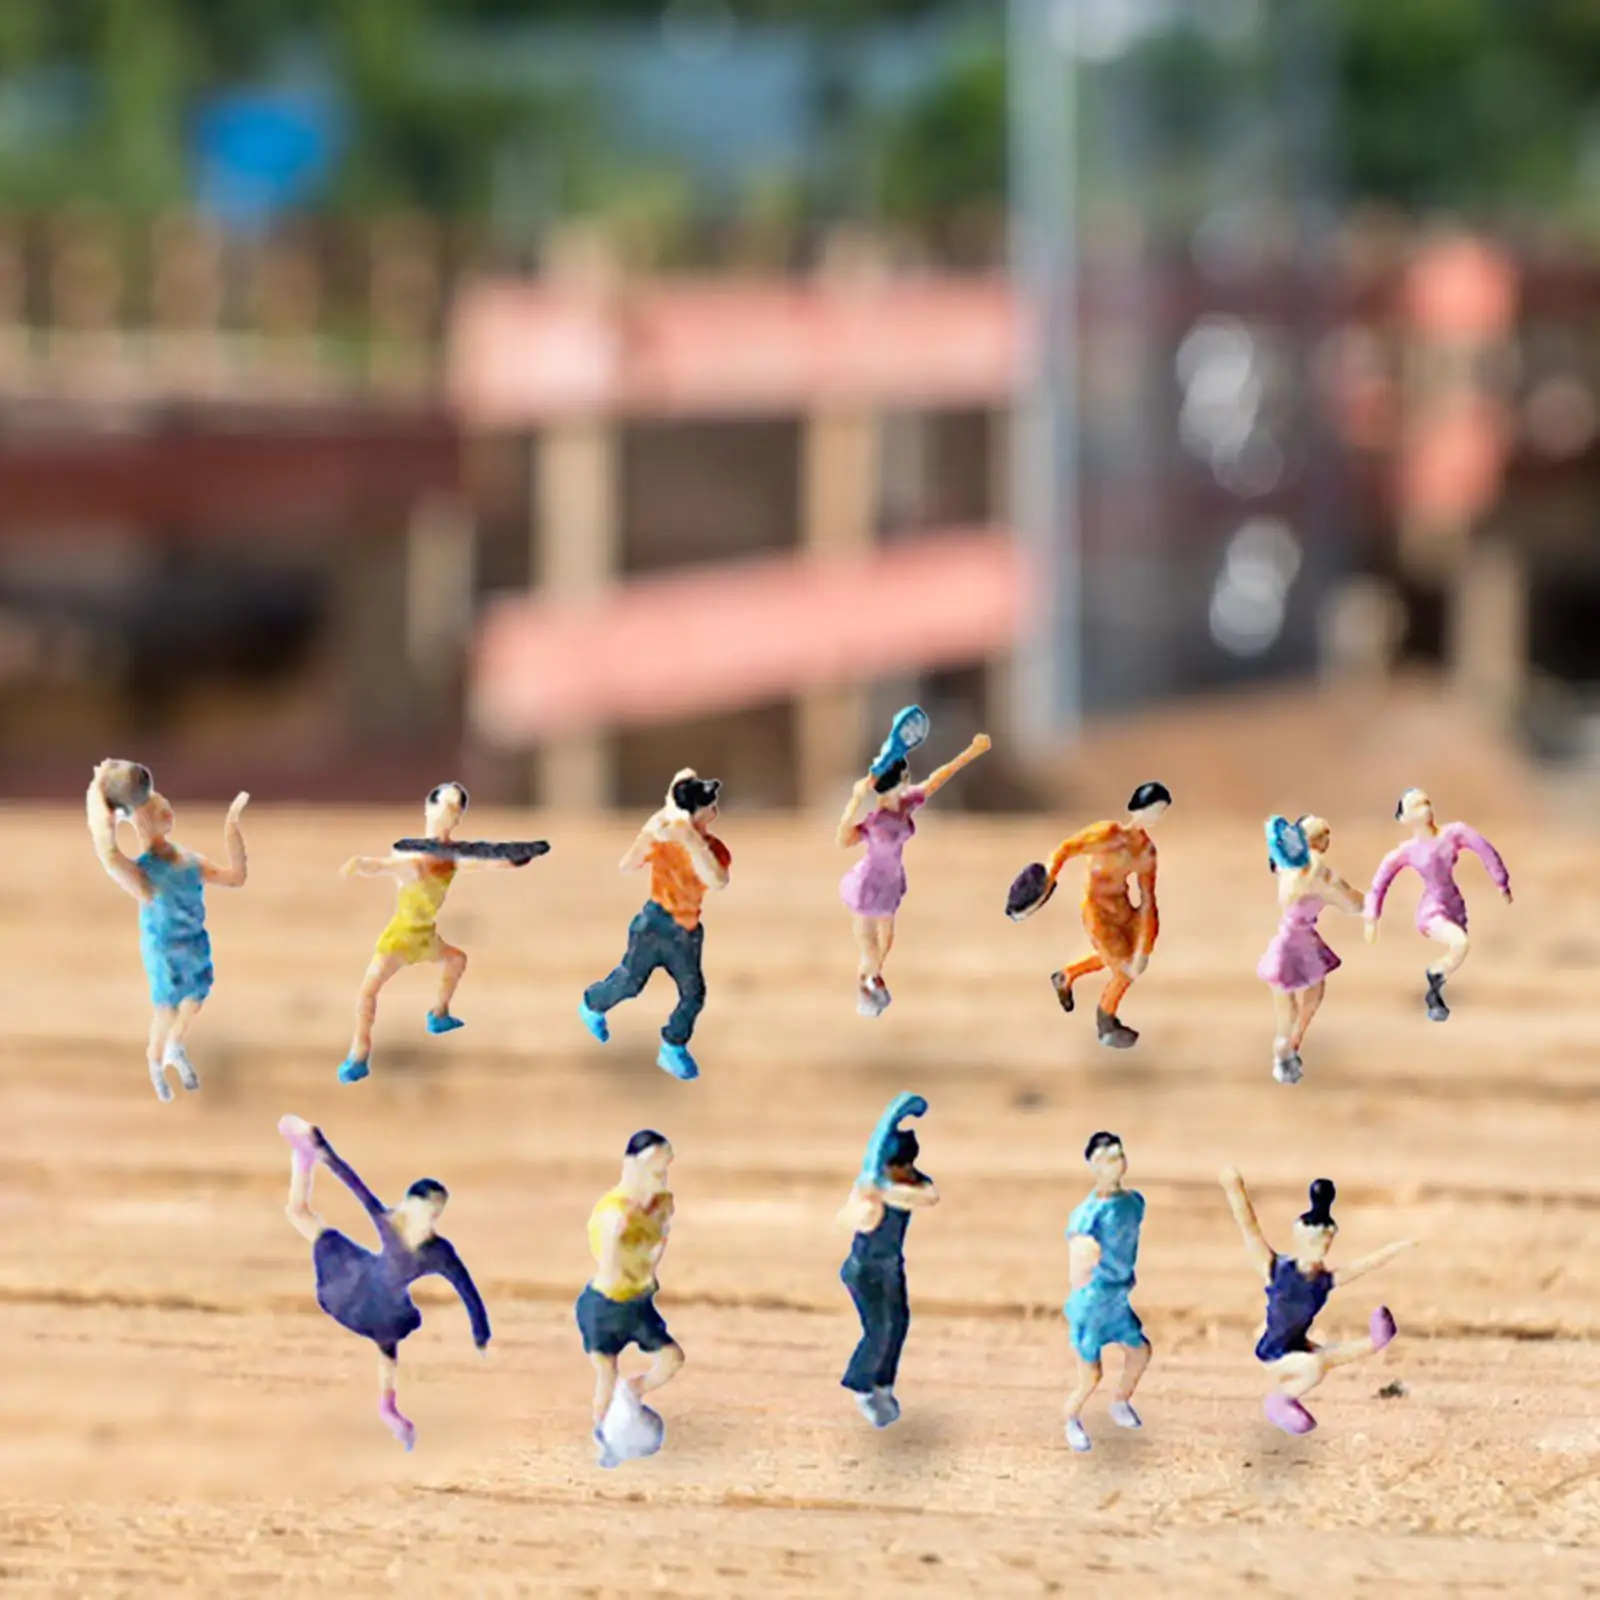 Miniature Model Figures Movie Props Miniature Sport Player Figurines for DIY Projects Accessory DIY Scene Decor Diorama Layout